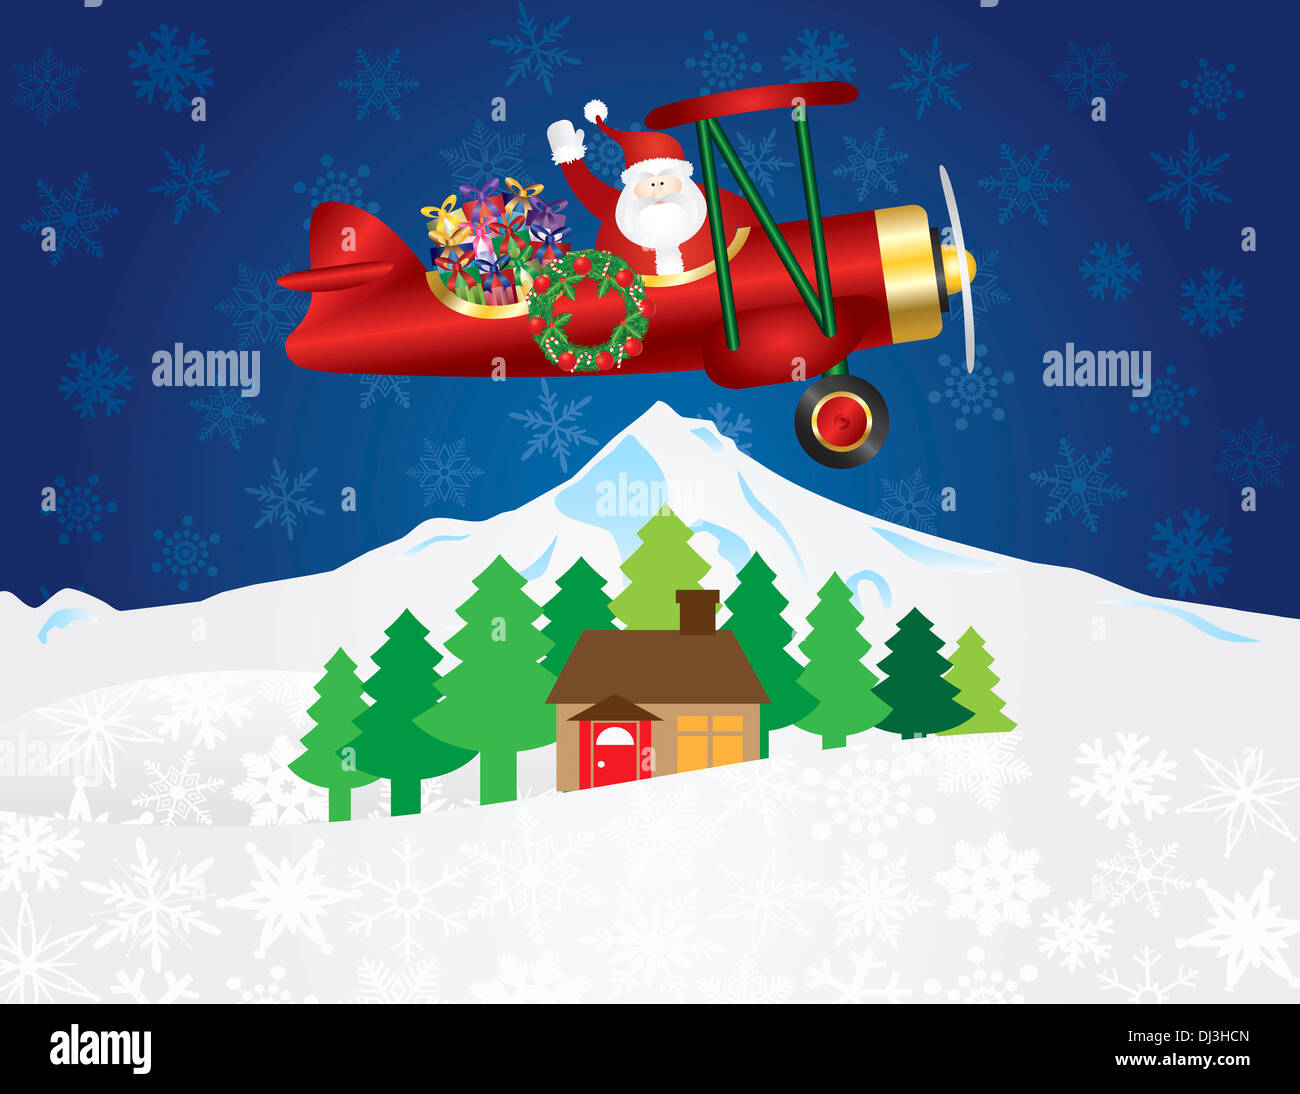 Santa Claus Waving on Biplane Delivering Wrapped Presents Flying Over Winter Snow Scene at Night Background